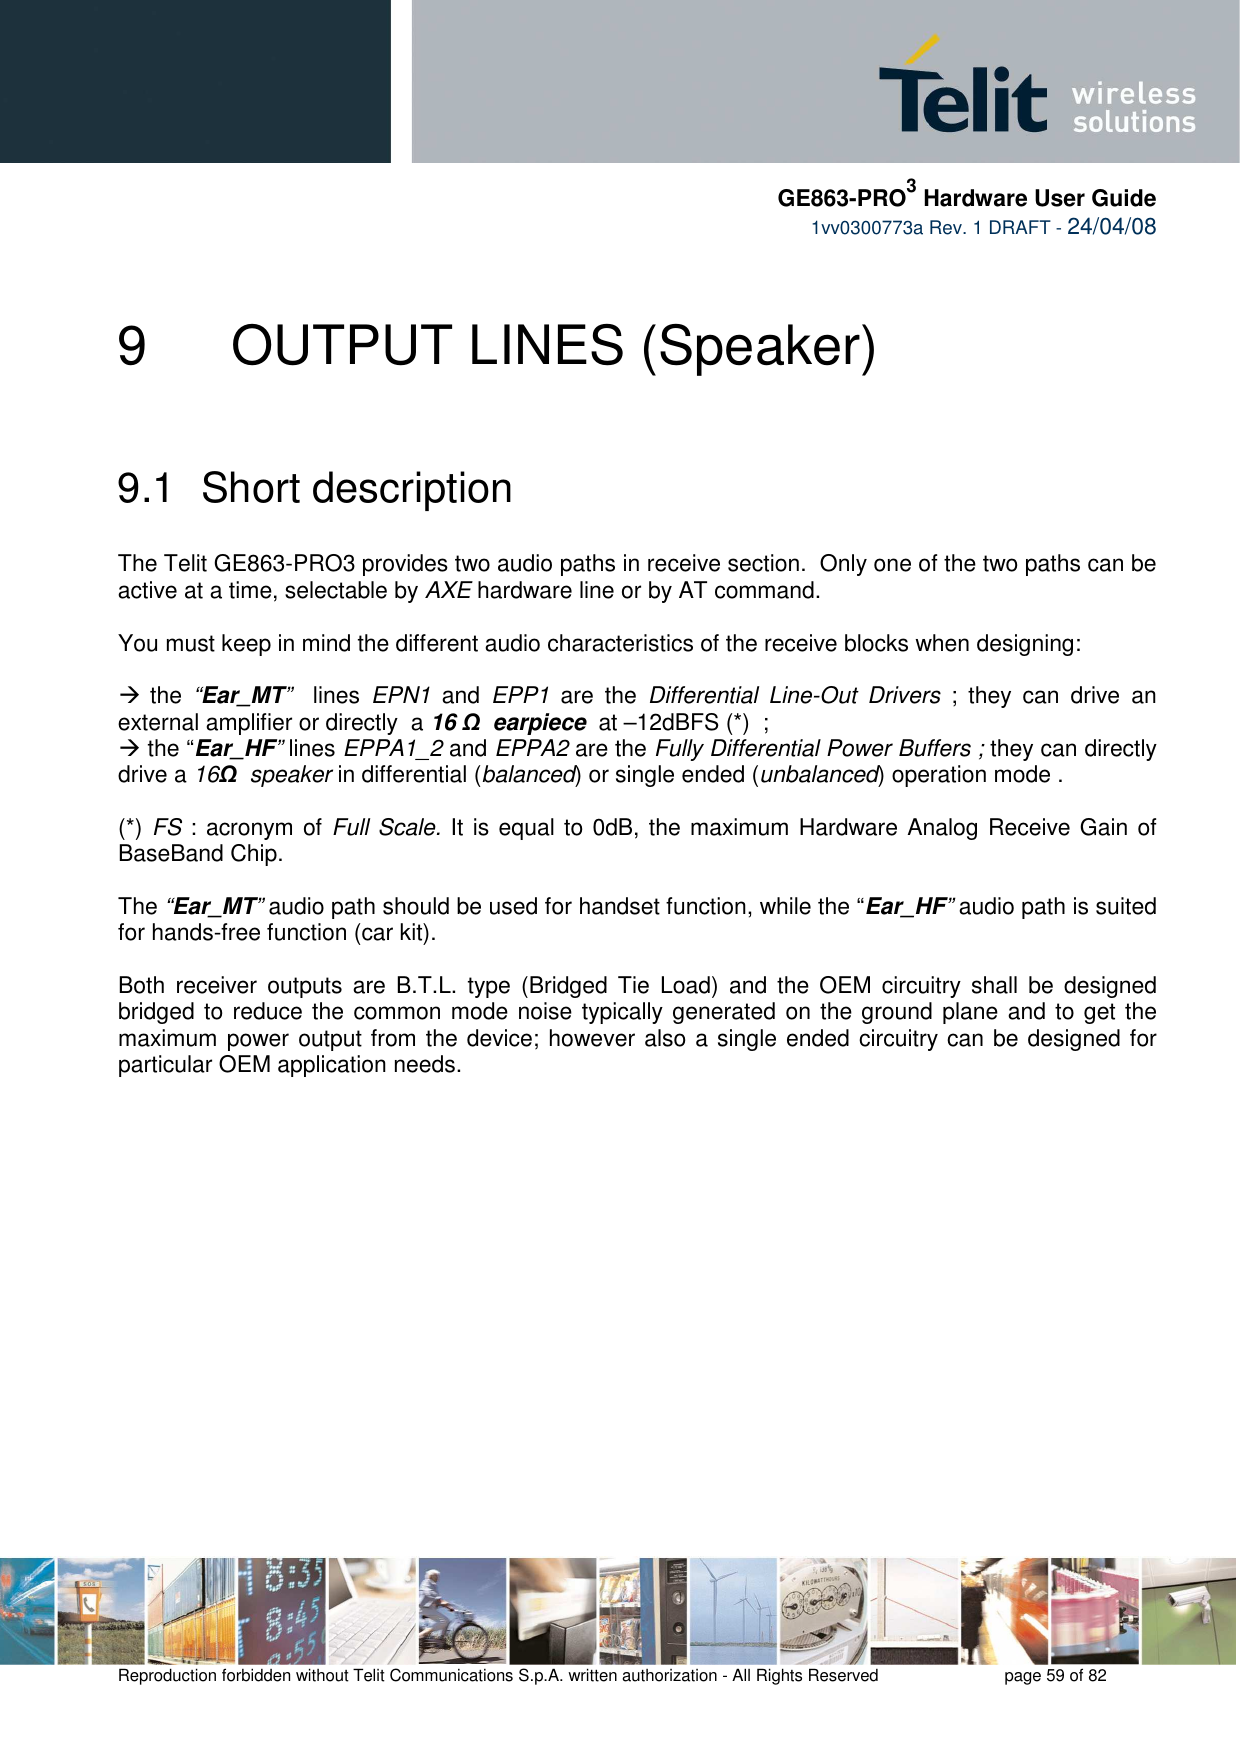     GE863-PRO3 Hardware User Guide  1vv0300773a Rev. 1 DRAFT - 24/04/08    Reproduction forbidden without Telit Communications S.p.A. written authorization - All Rights Reserved    page 59 of 82  9    OUTPUT LINES (Speaker)  9.1  Short description  The Telit GE863-PRO3 provides two audio paths in receive section.  Only one of the two paths can be active at a time, selectable by AXE hardware line or by AT command.   You must keep in mind the different audio characteristics of the receive blocks when designing:   the  “Ear_MT”    lines  EPN1  and  EPP1  are  the  Differential  Line-Out  Drivers  ;  they  can  drive  an external amplifier or directly  a 16 Ω  earpiece  at –12dBFS (*)  ;   the “Ear_HF” lines EPPA1_2 and EPPA2 are the Fully Differential Power Buffers ; they can directly drive a 16Ω  speaker in differential (balanced) or single ended (unbalanced) operation mode .  (*) FS : acronym of Full Scale. It is equal to 0dB, the maximum Hardware Analog Receive Gain of BaseBand Chip.  The “Ear_MT” audio path should be used for handset function, while the “Ear_HF” audio path is suited for hands-free function (car kit).  Both  receiver  outputs  are  B.T.L.  type  (Bridged  Tie  Load)  and  the OEM  circuitry  shall  be  designed bridged to reduce the  common mode noise typically generated on the ground plane and to get the maximum power output from the device; however also a single ended circuitry can be designed for particular OEM application needs.  